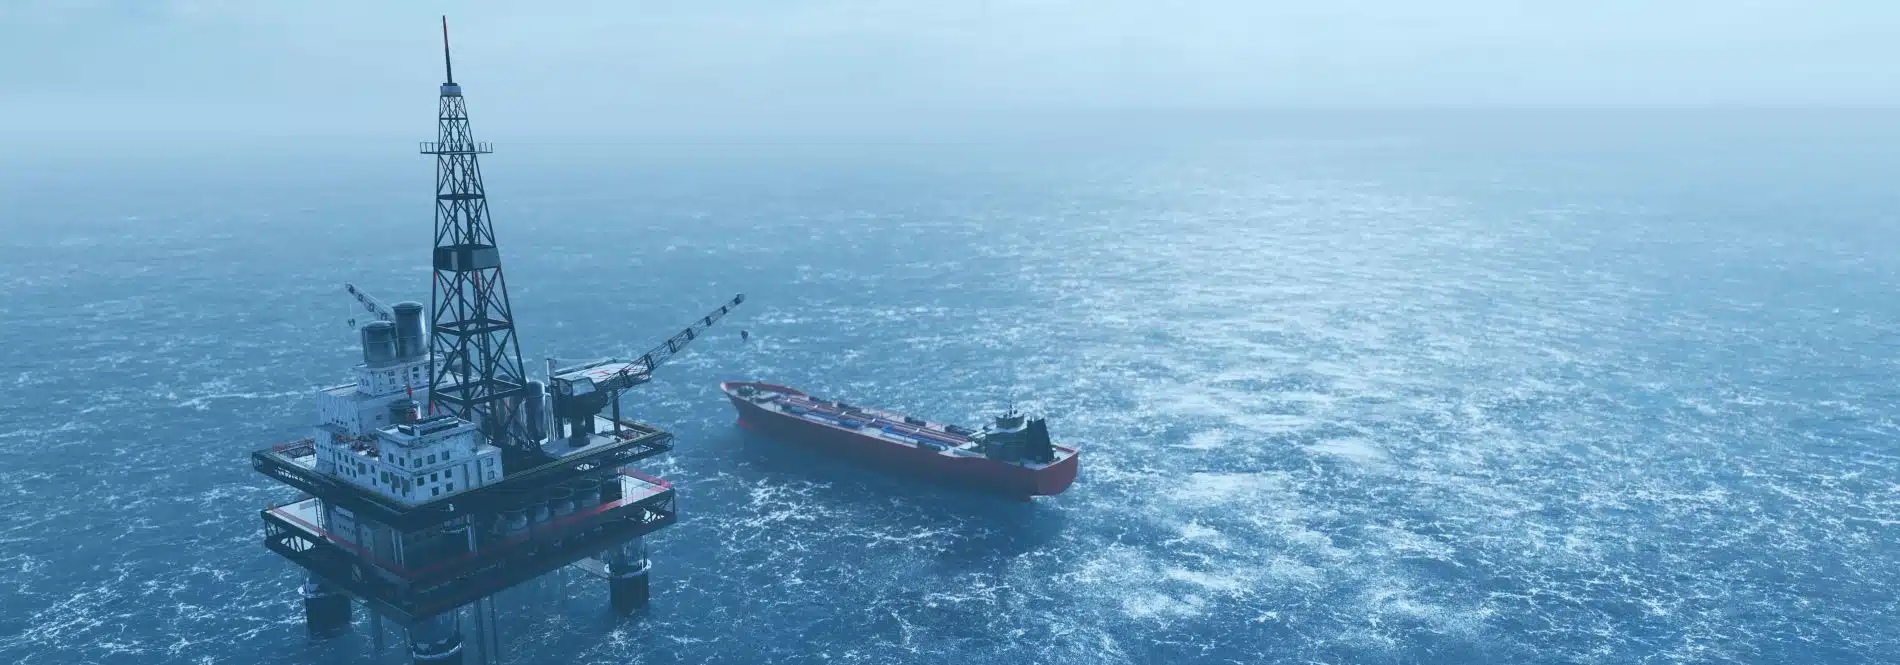 A ship and a drilling platform in the sea